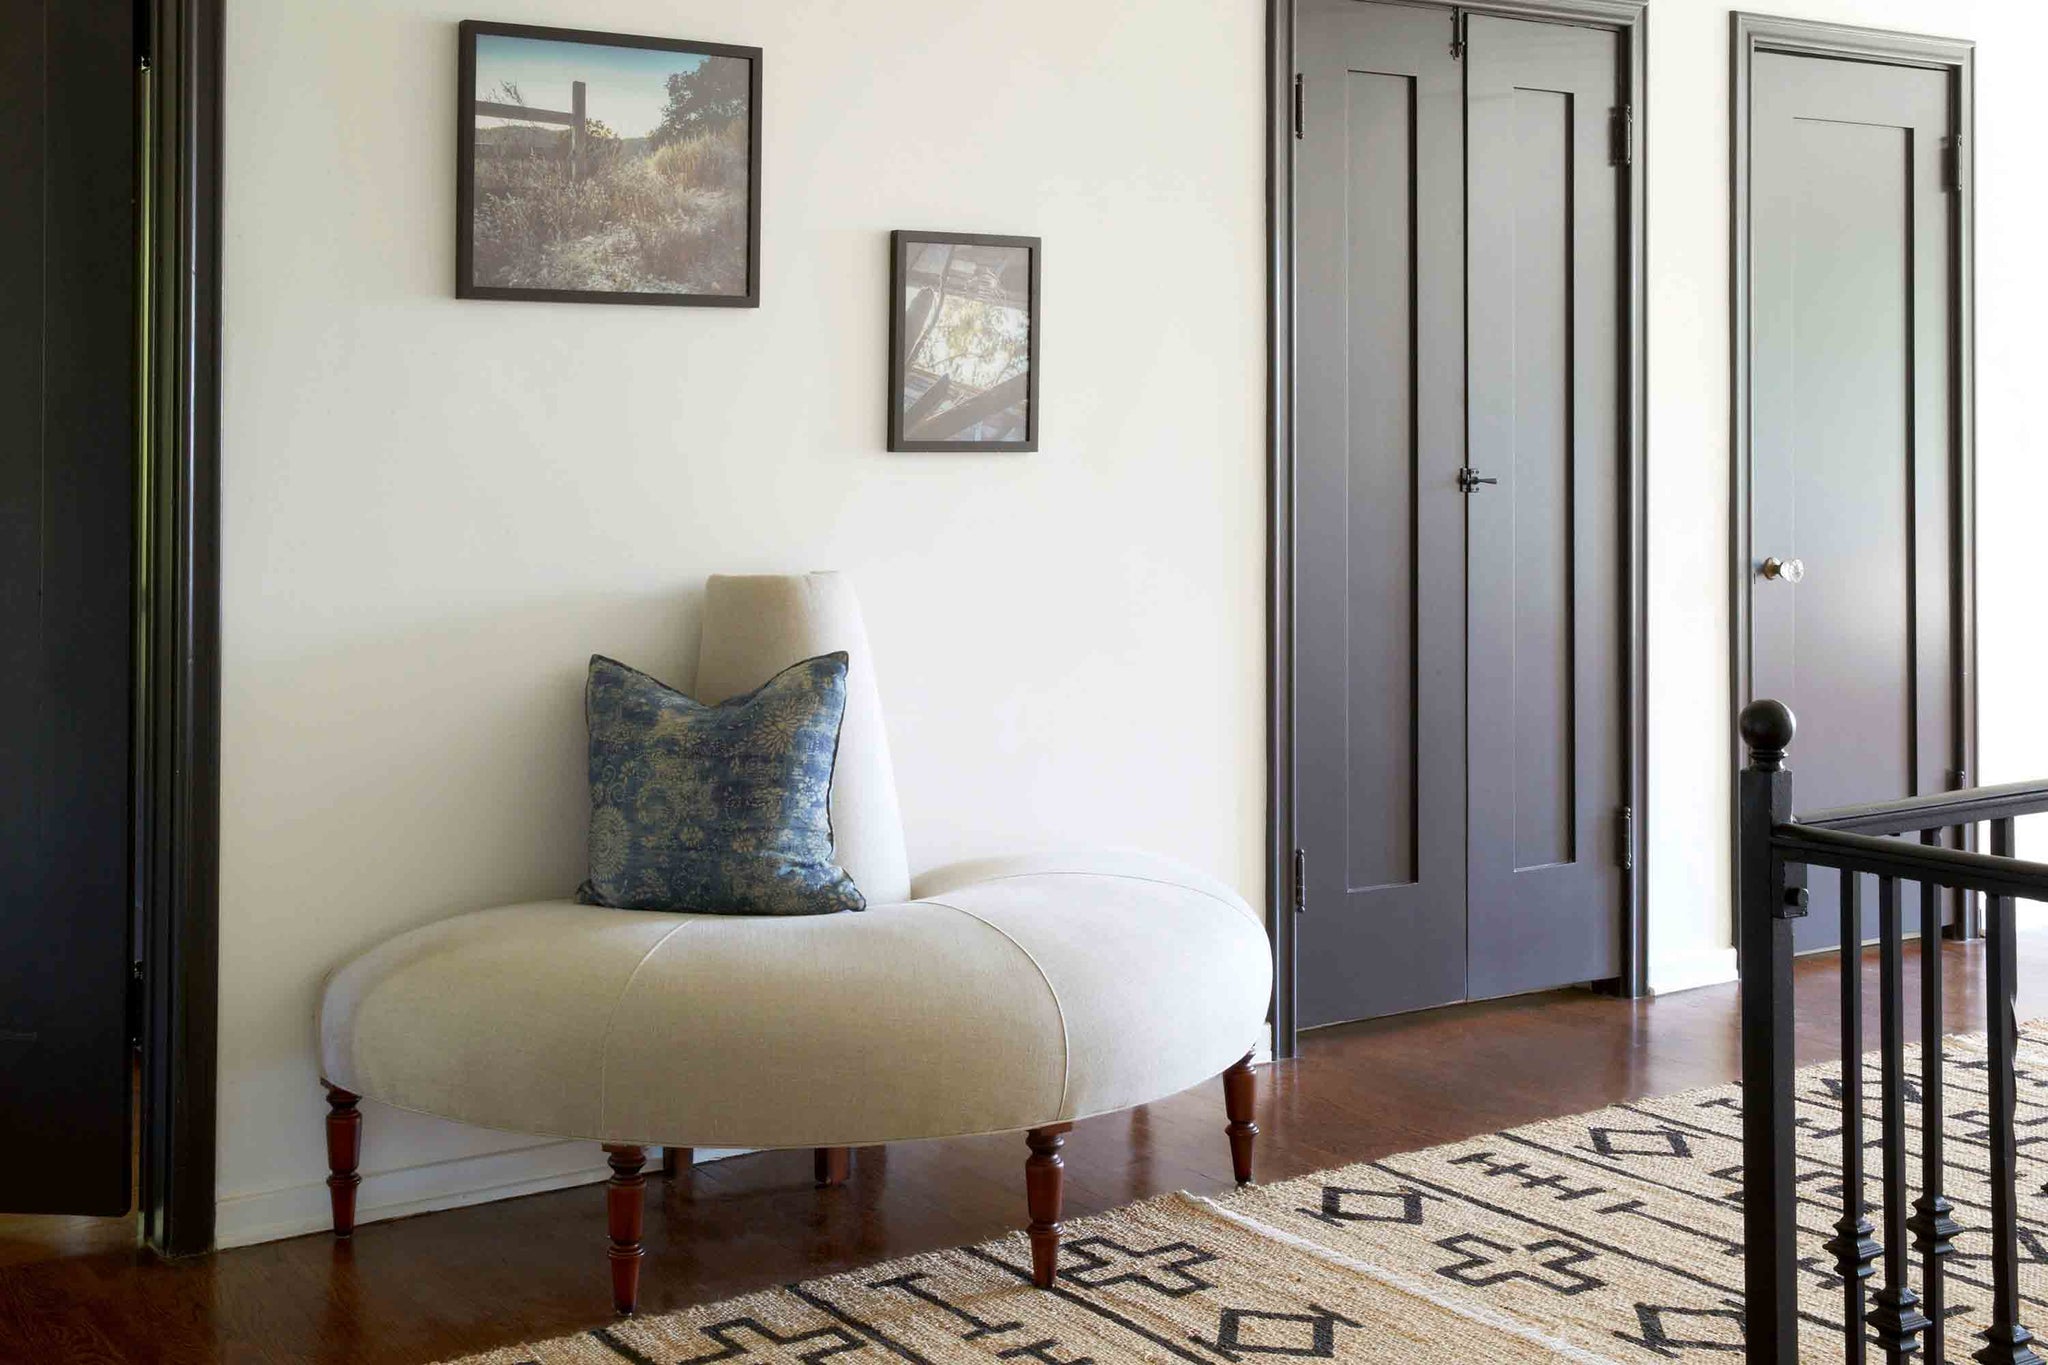  The Half Coin sofa is shown in Vintage Flax linen, a light colored fabric. It is in a hallway, against the wall, between 2 dark doors. There is a blue pillow on it and 2 frames are hanging on the wall. Photographed in Vintage Flax. 